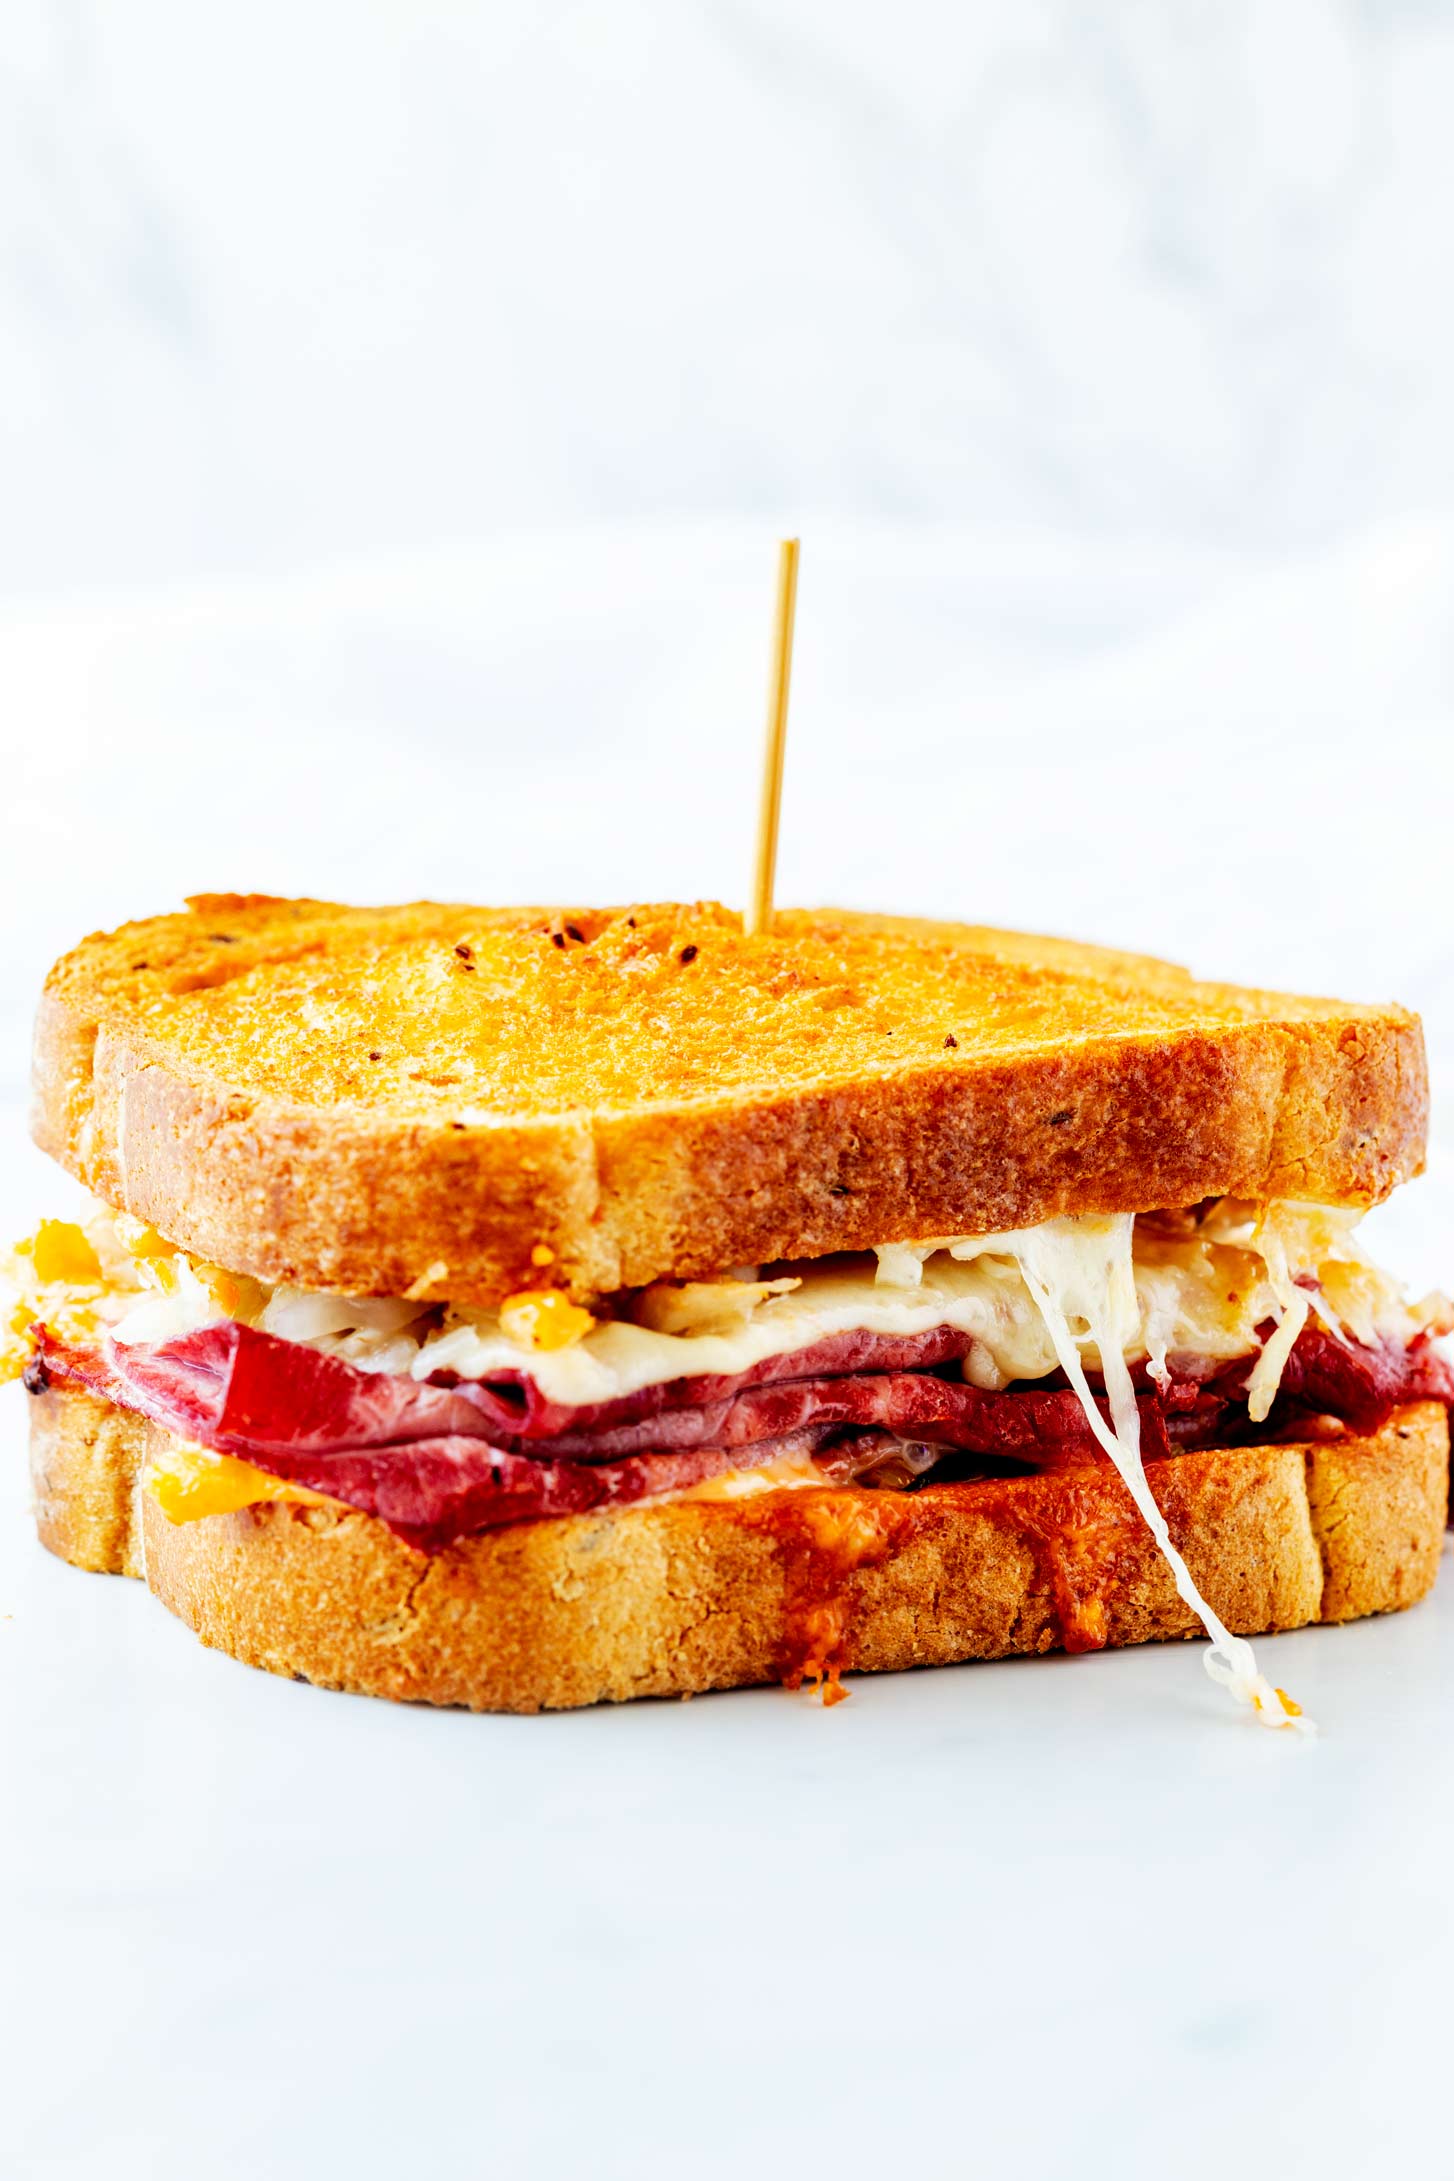 Photo of an air fryer Reuben with a skewer through it on a white background.